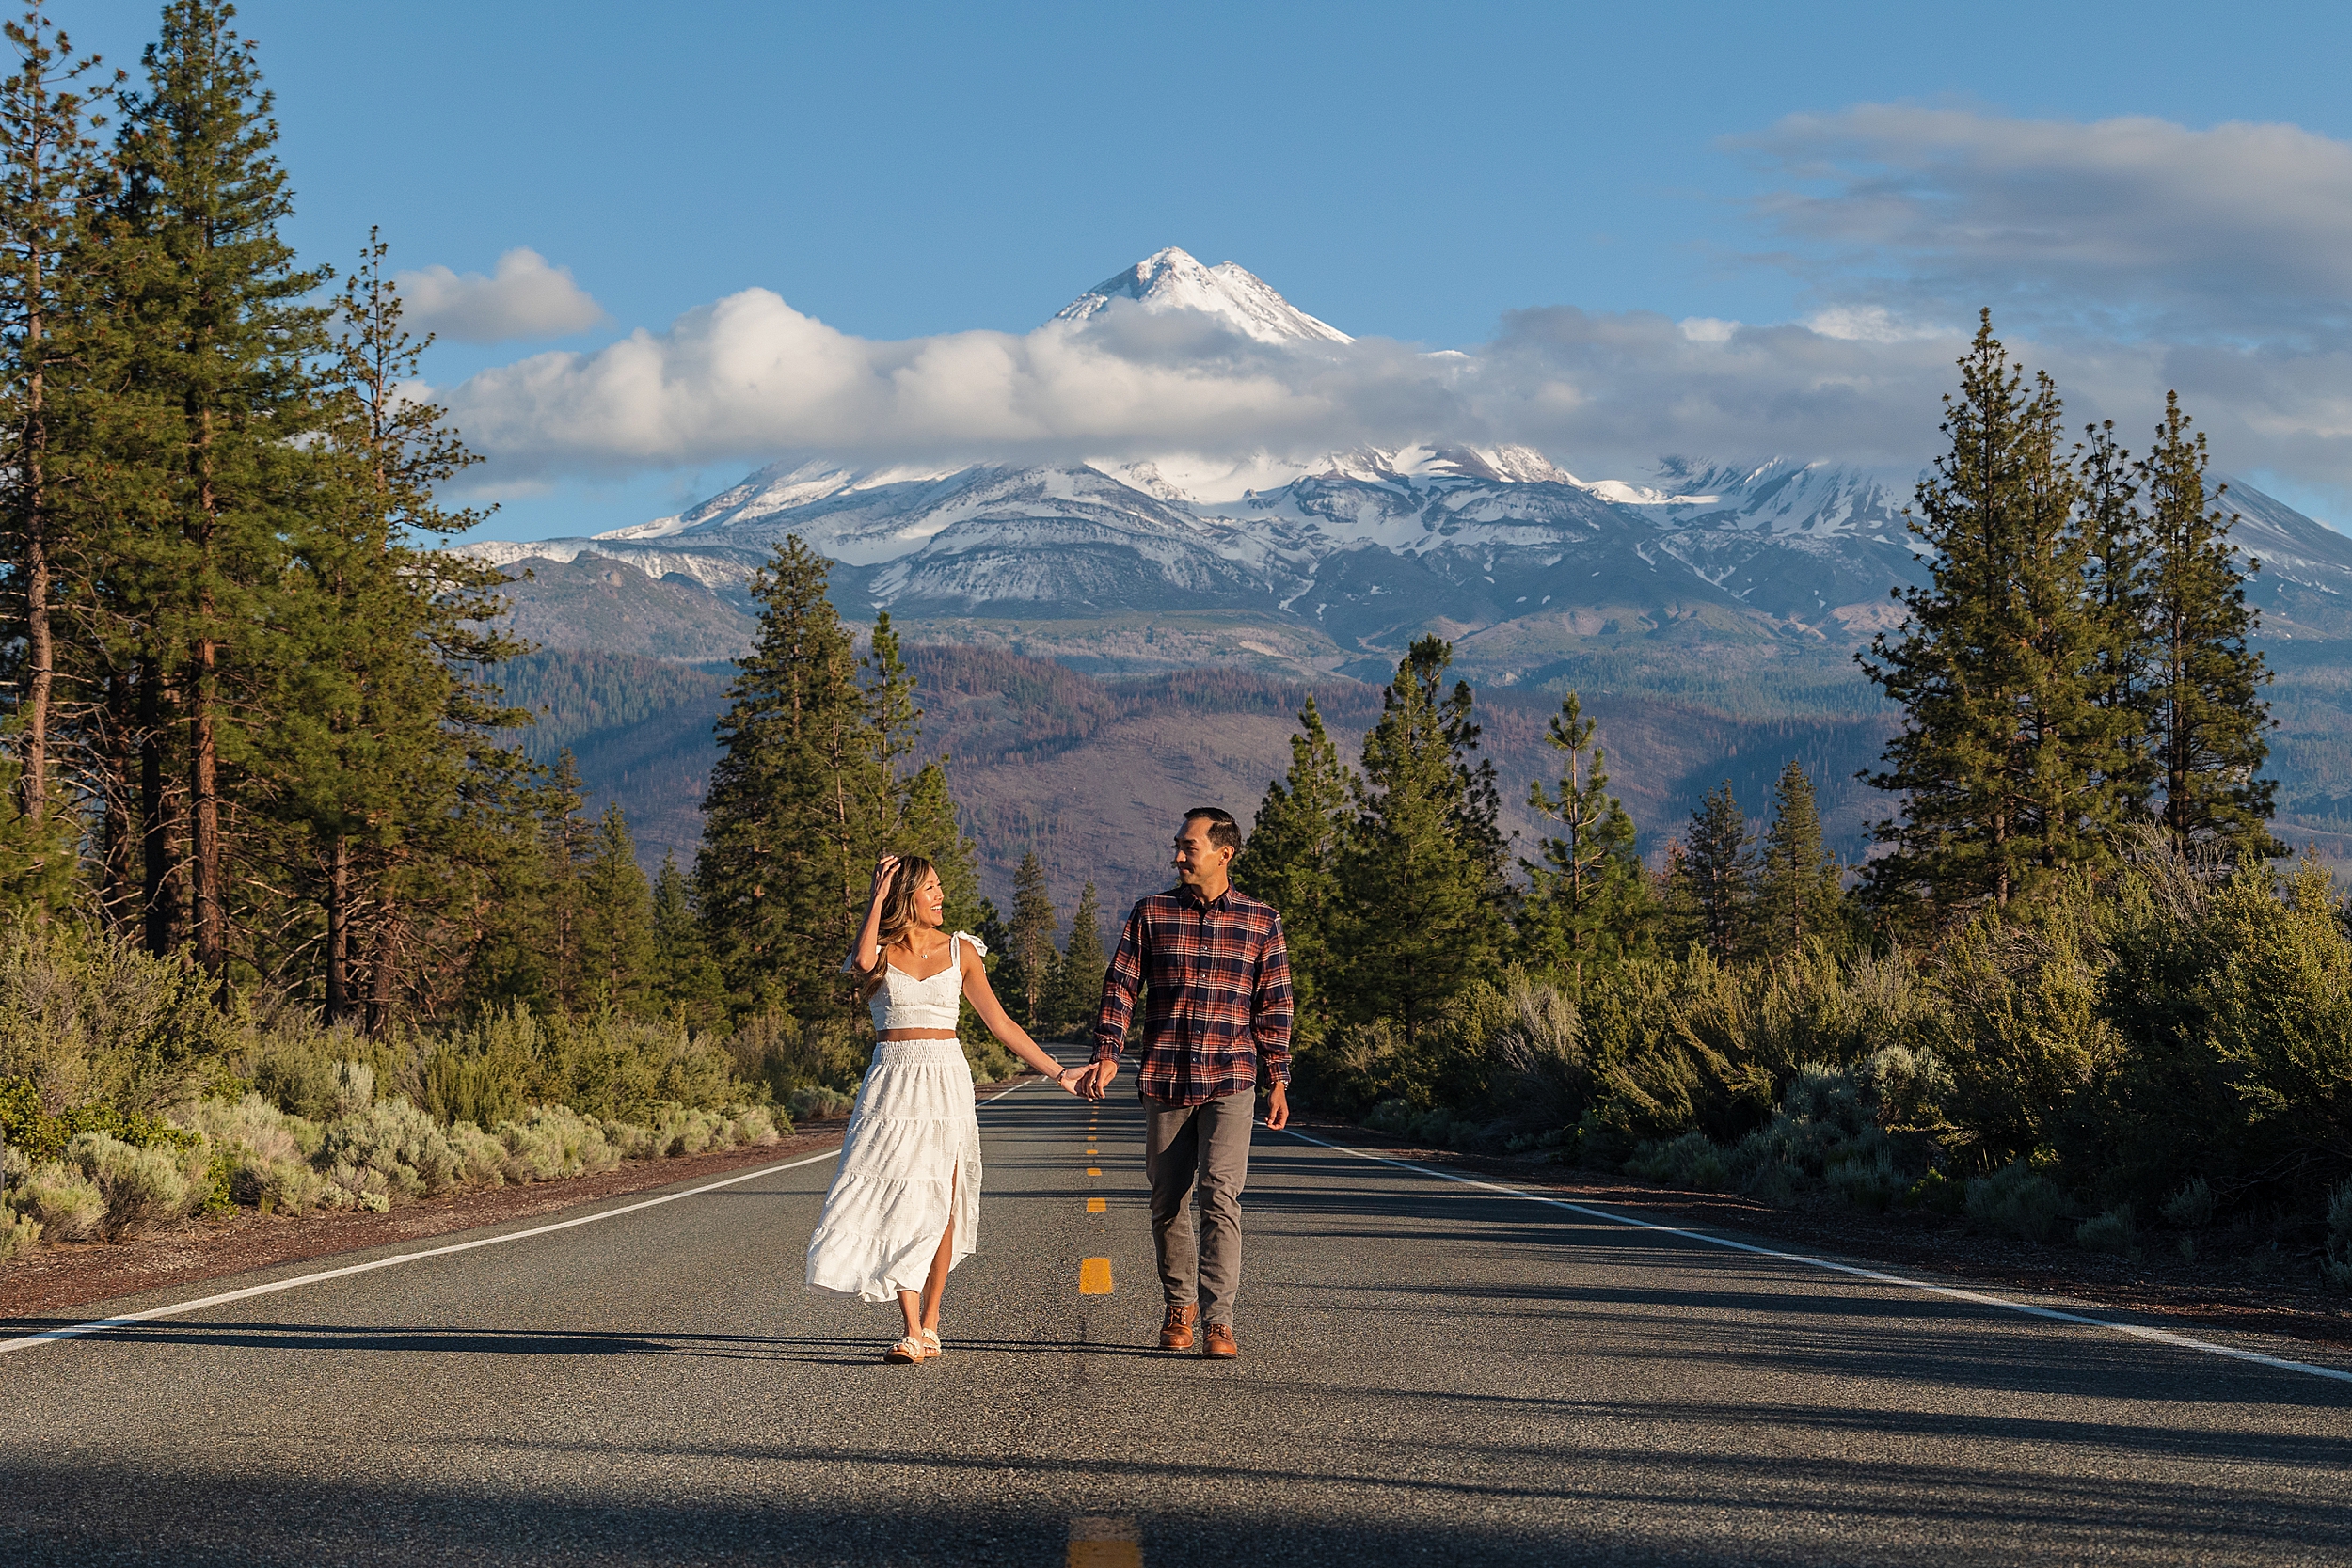 Cute couple walking in the road with Mt. Shasta behind them